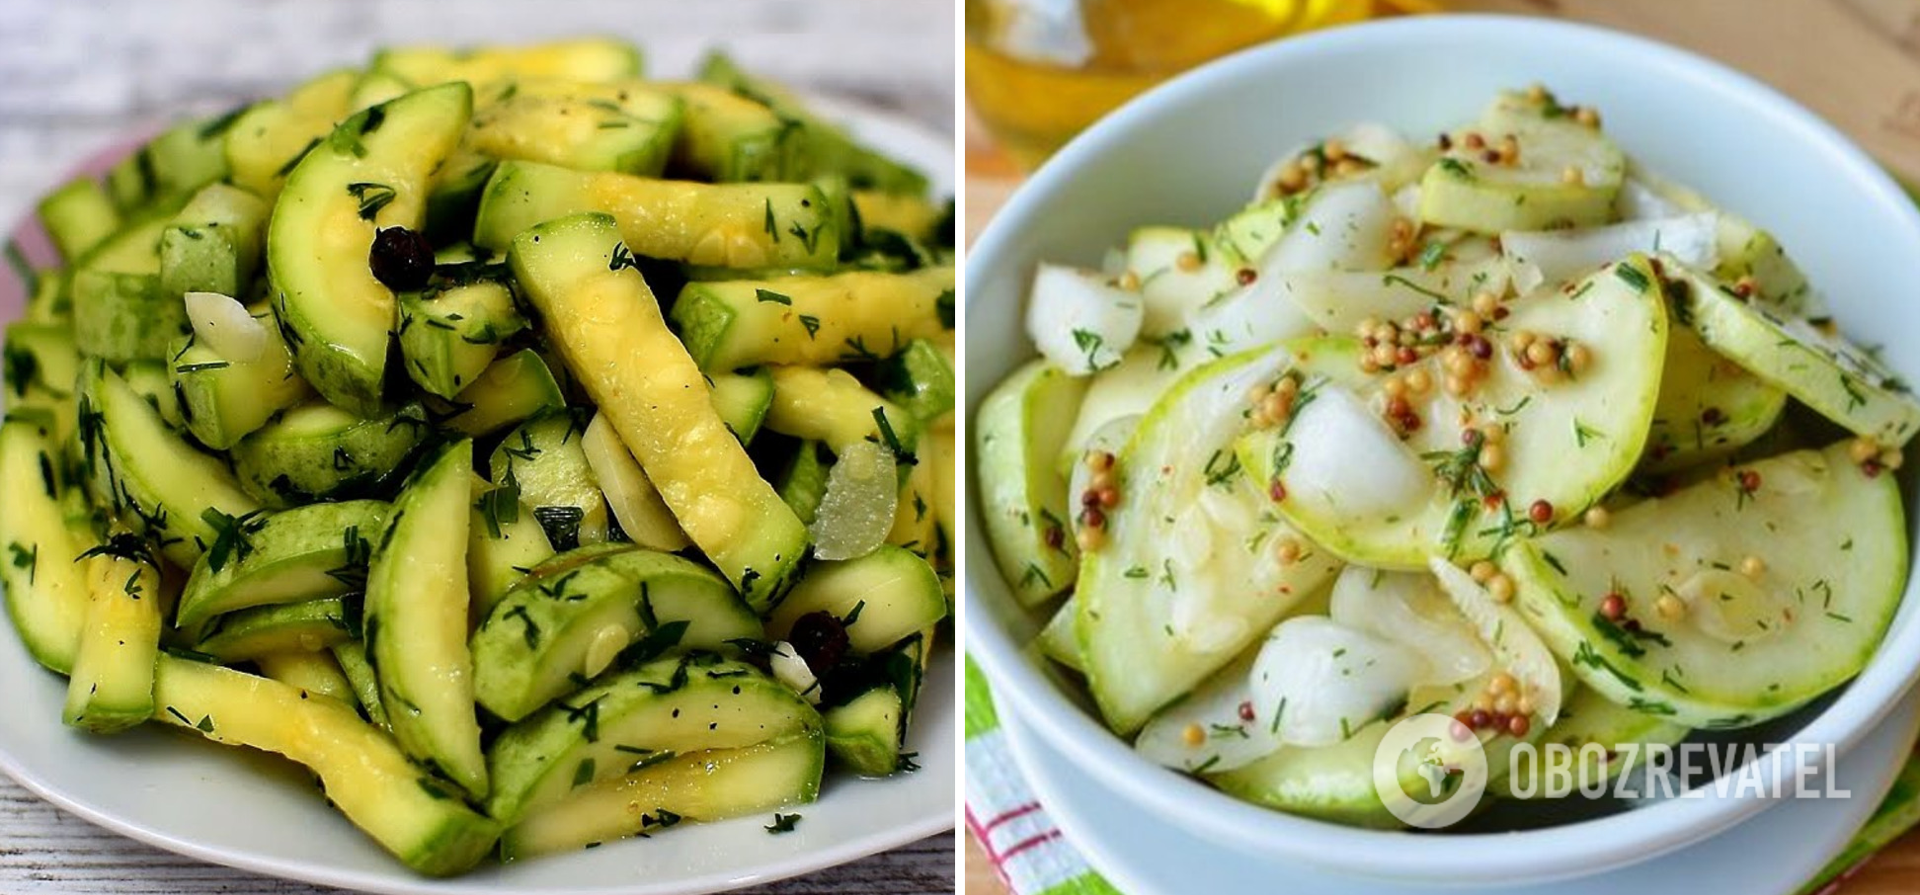 Pickled zucchini with spices and herbs